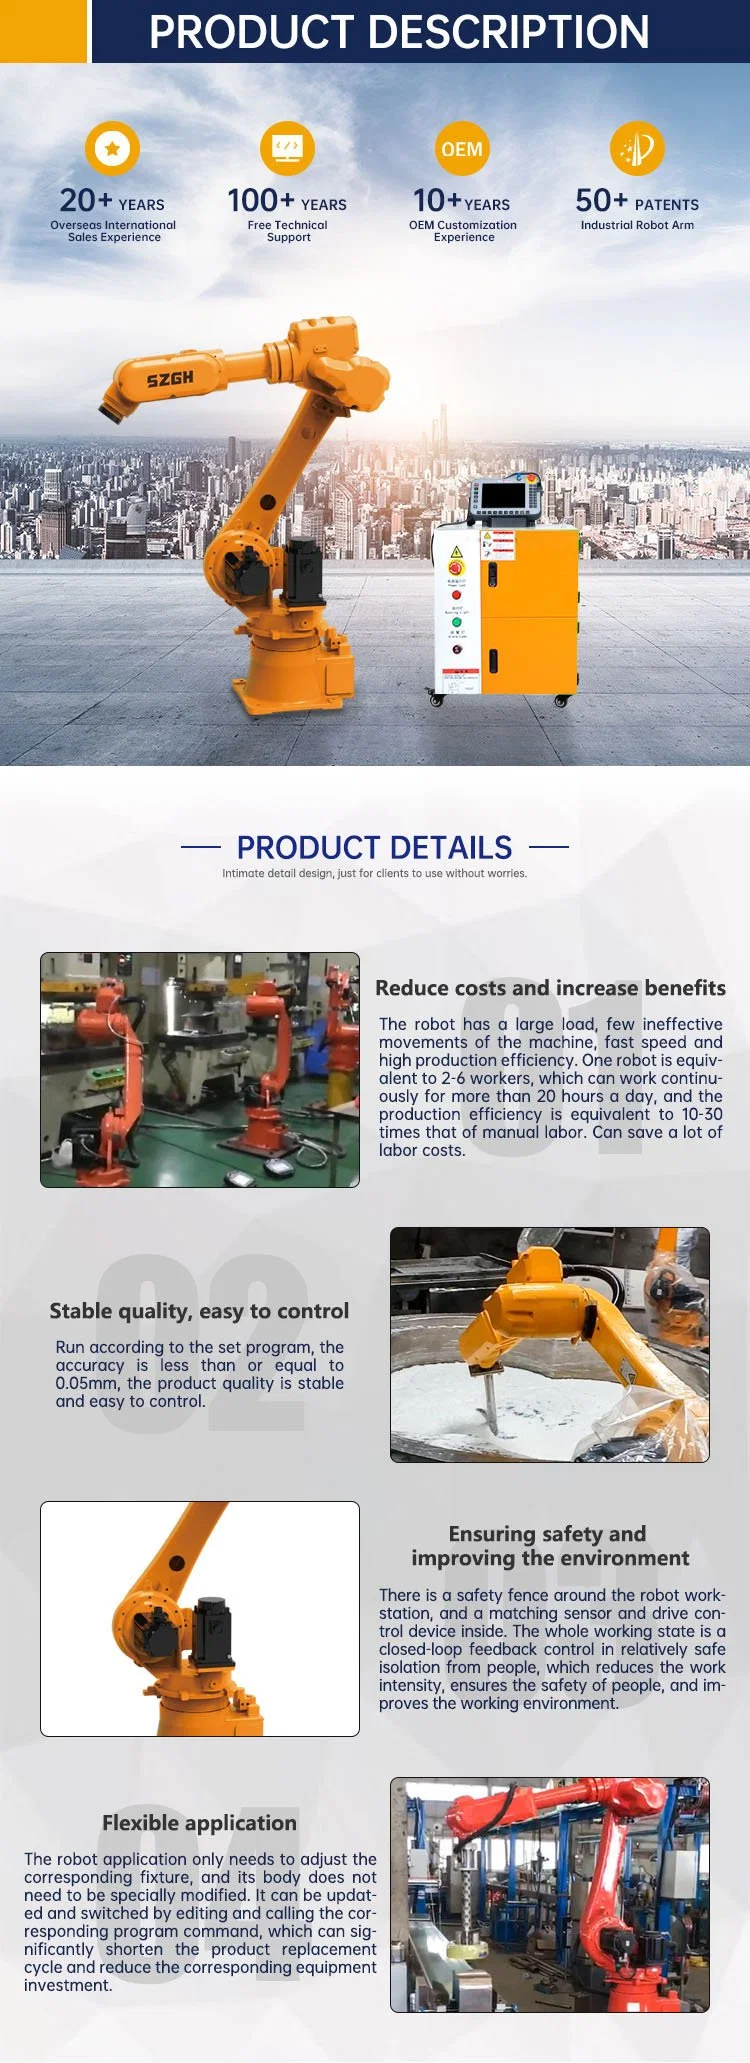 Six Axis Robot Arm Joint Welding Manipulator 6kg Payload Robotic Arm Industrial TIG Mag TIG Dig CNC Engraving Machine